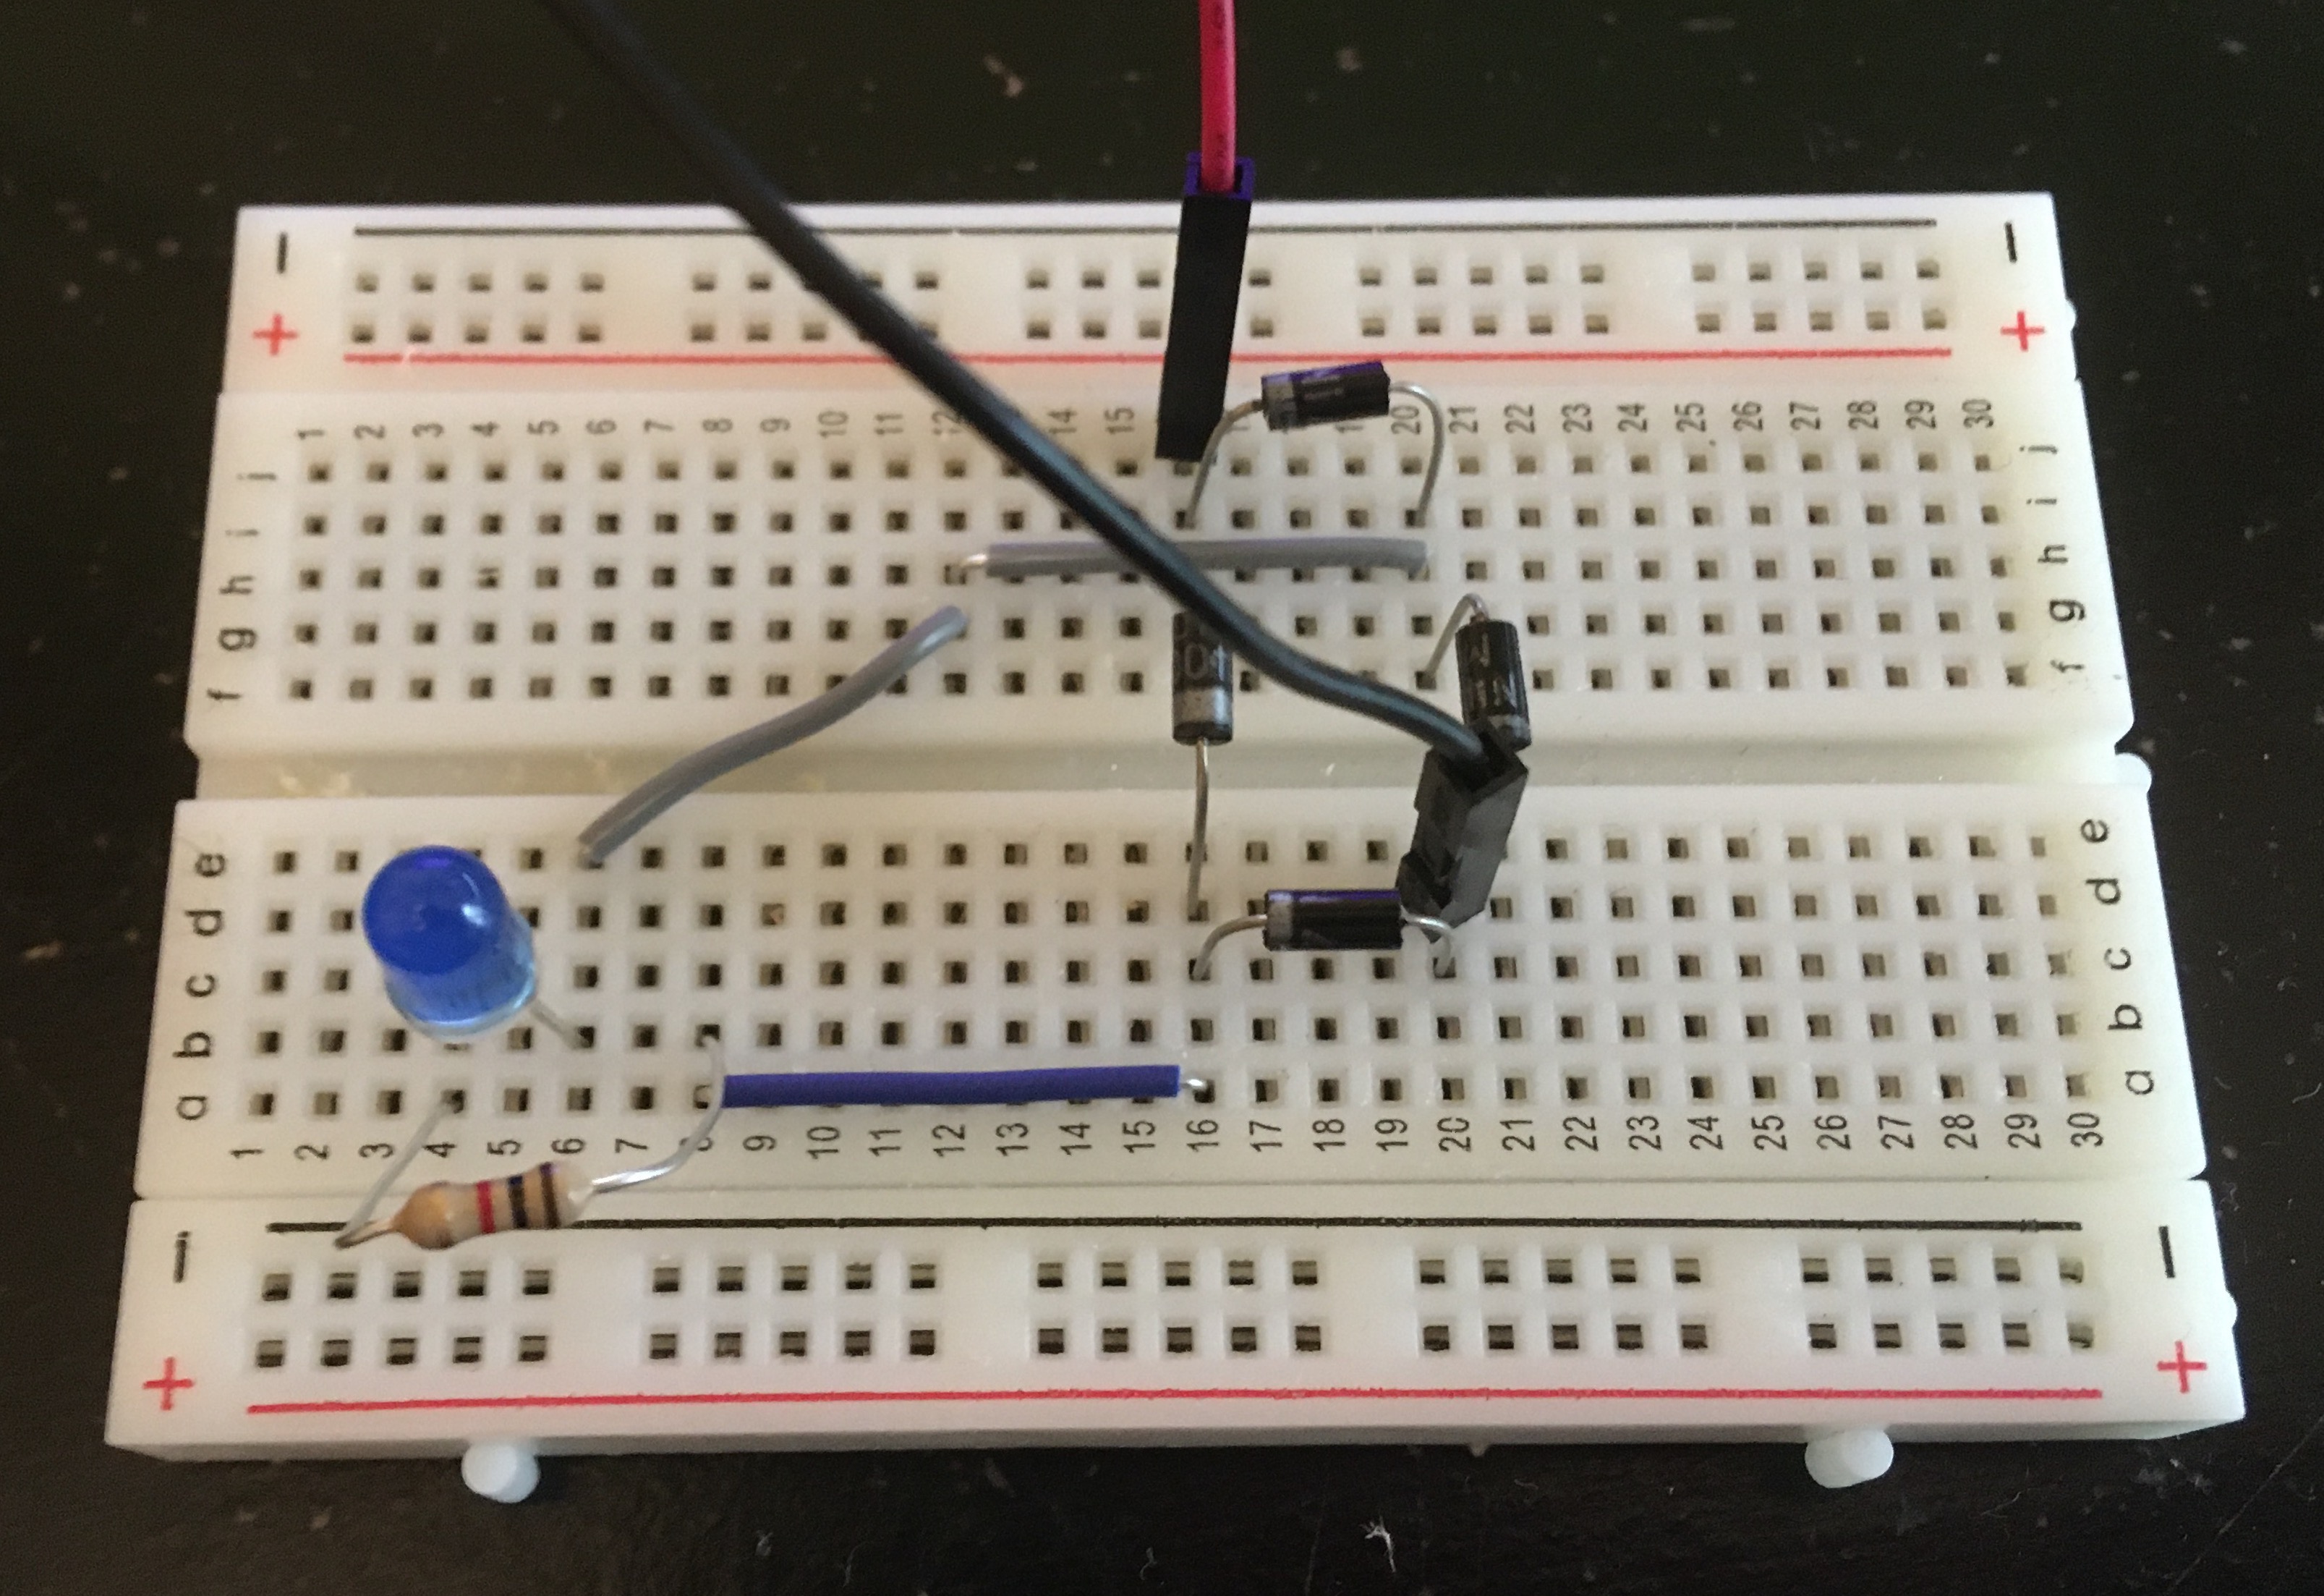 Circuits Components Arranged on Breadboard